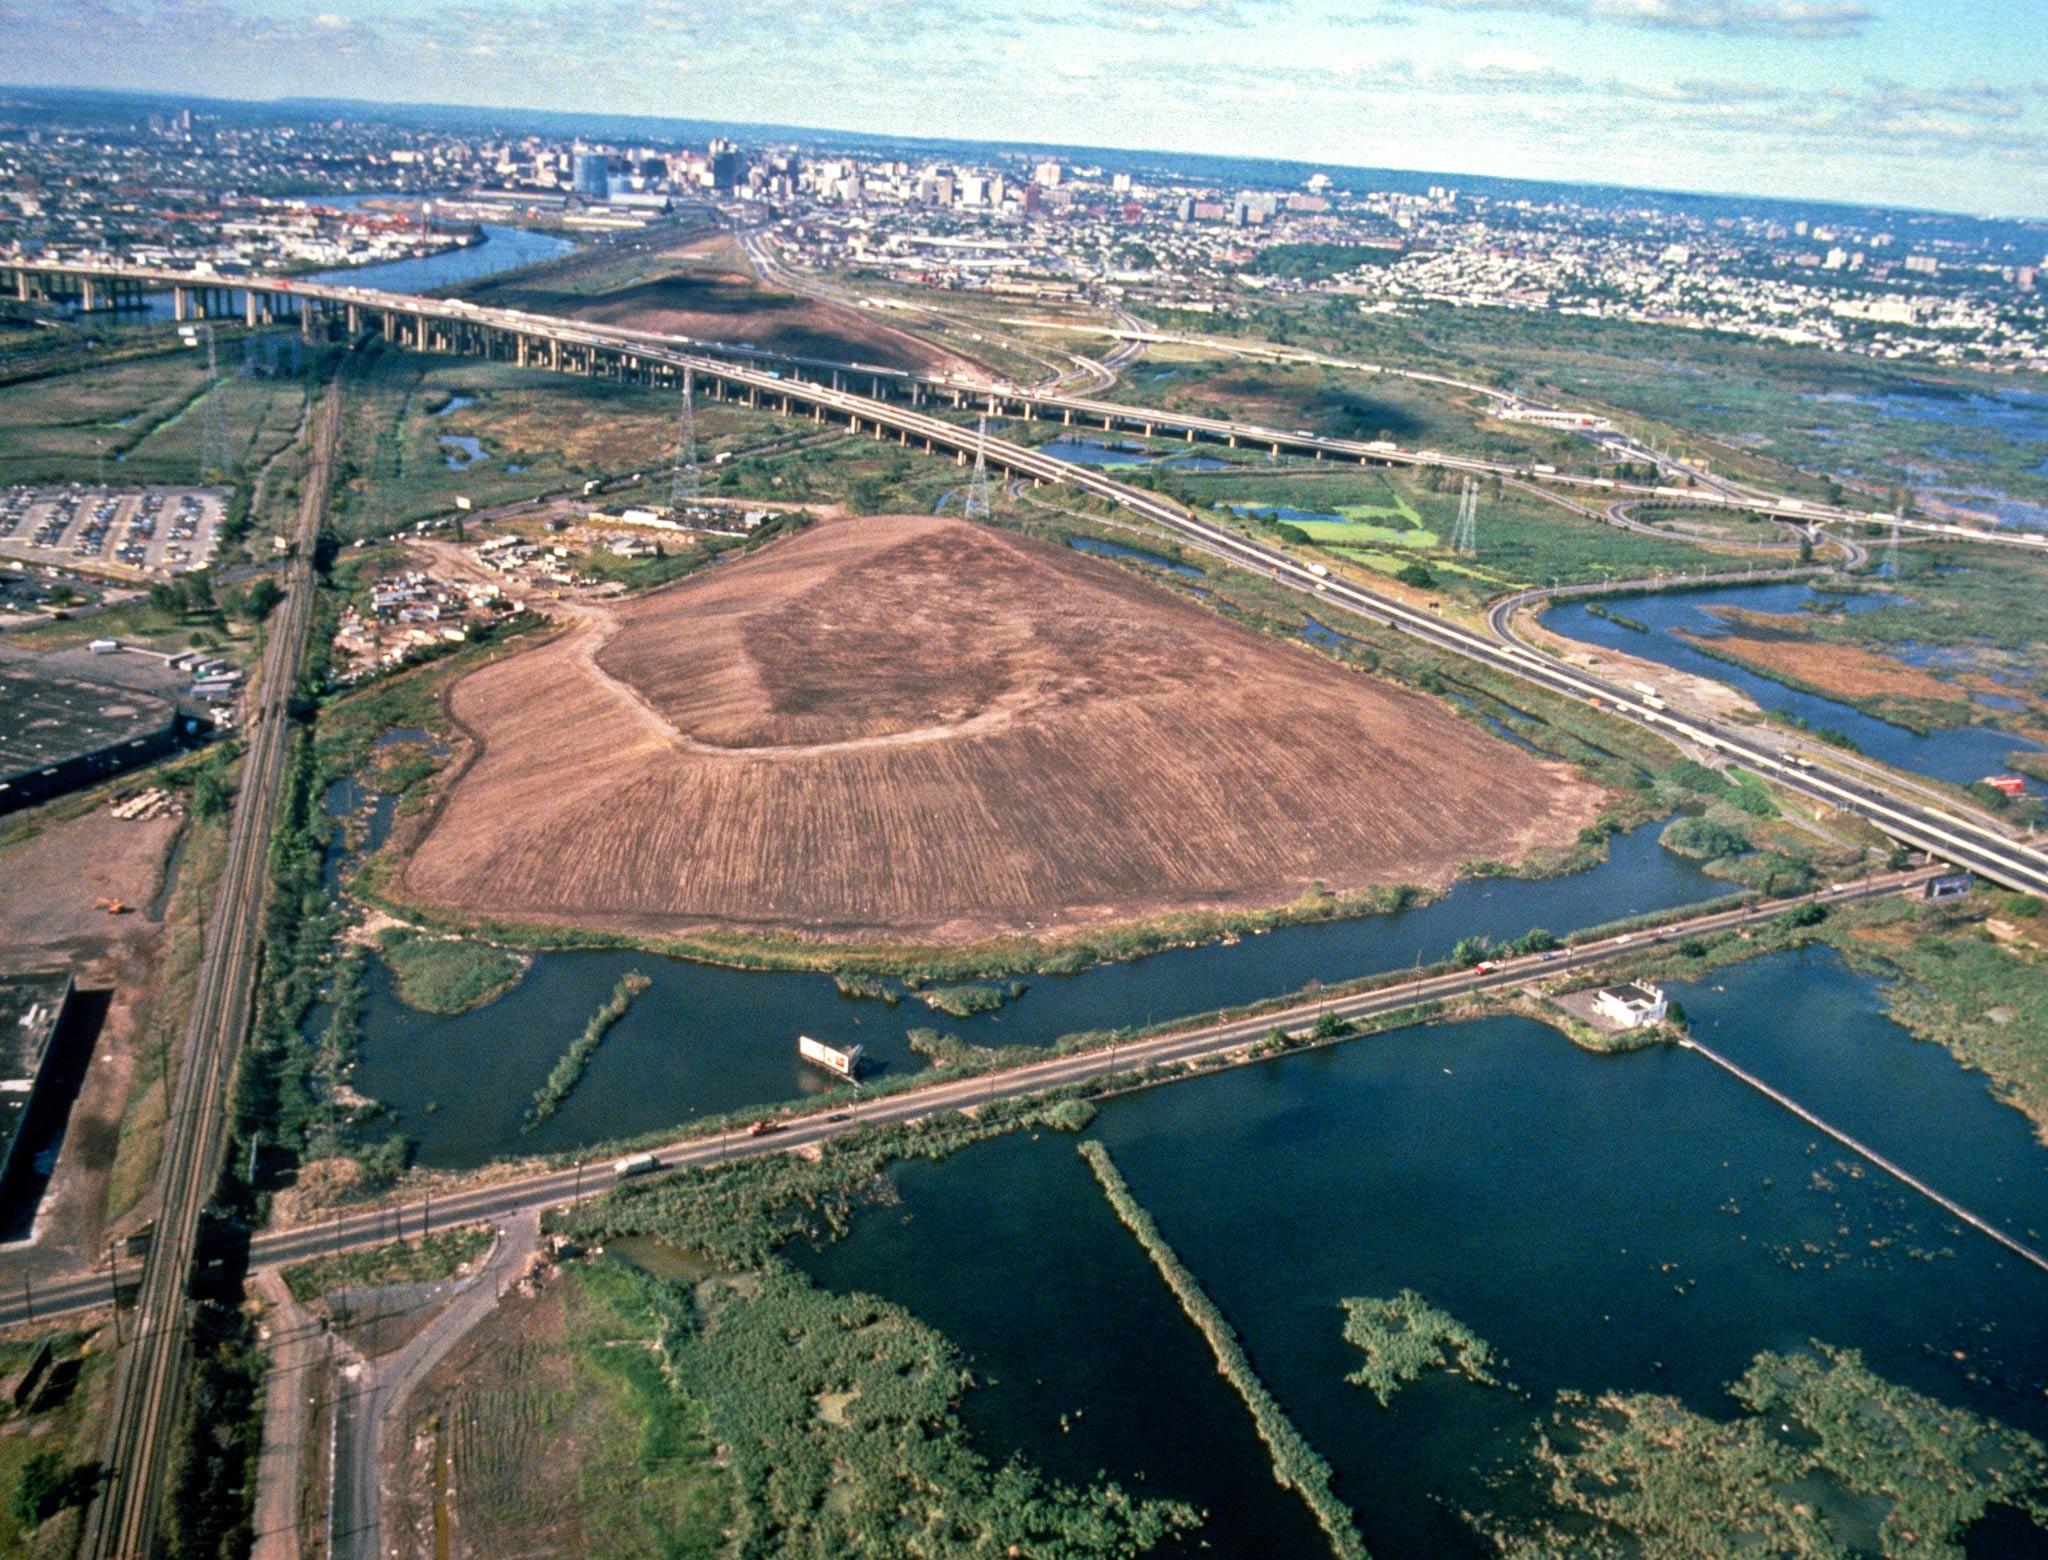 An aerial view of a triangular mounded landmass, surrounding by roads and rail tracks